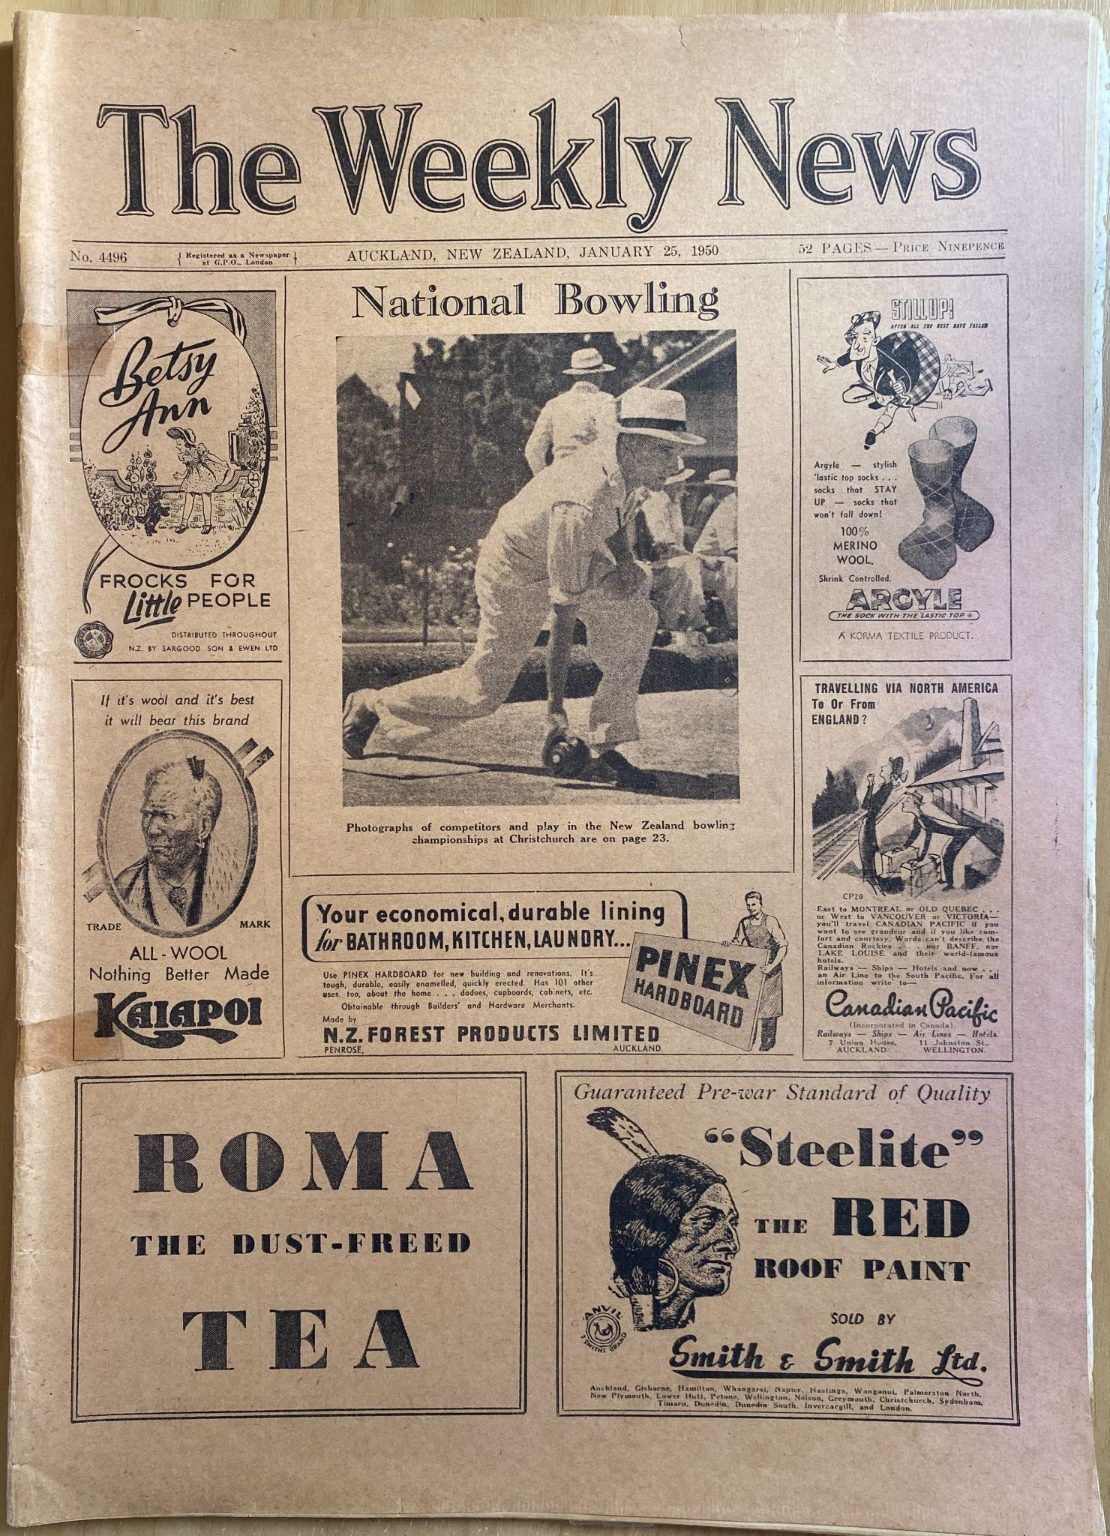 OLD NEWSPAPER: The Weekly News, No. 4496, 25 January 1950